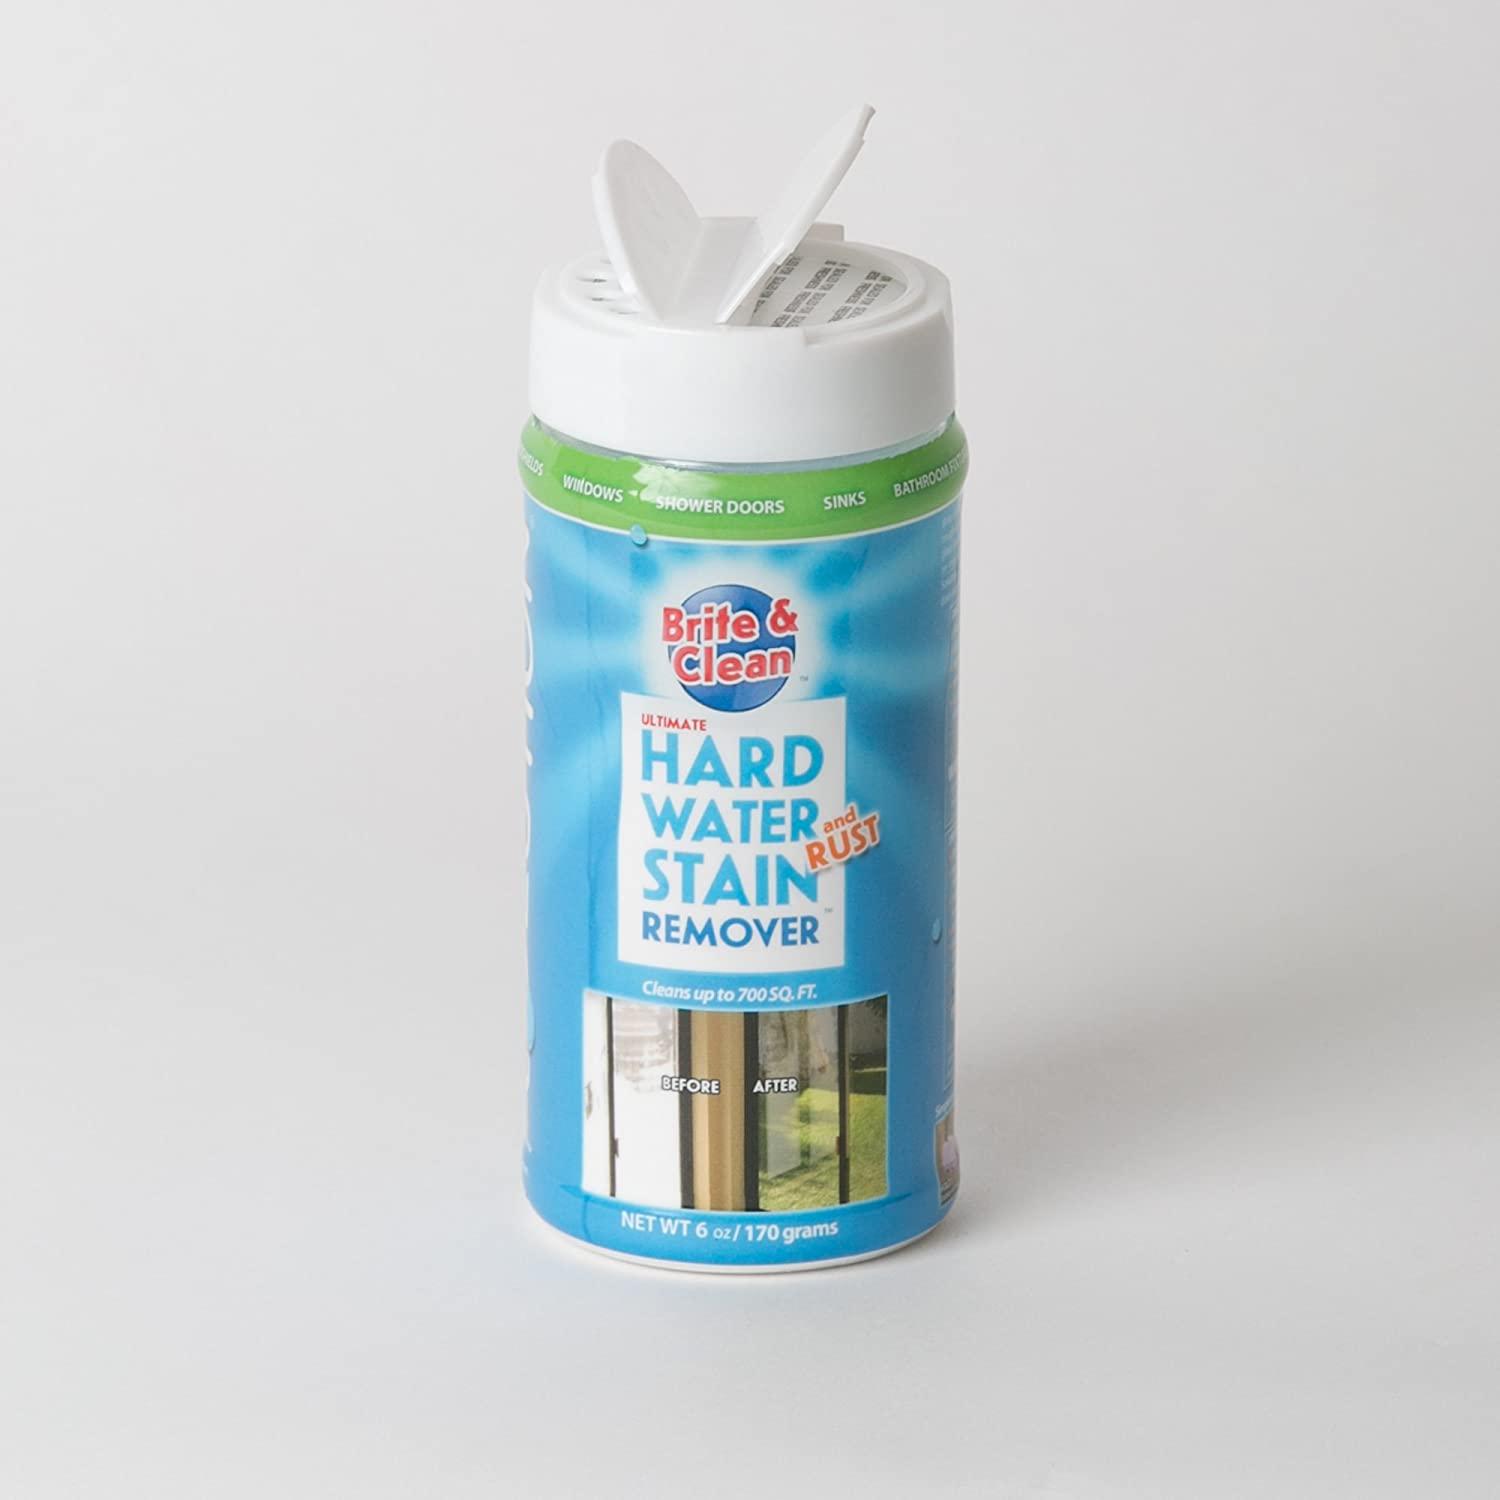 HARD WATER STAIN REMOVER